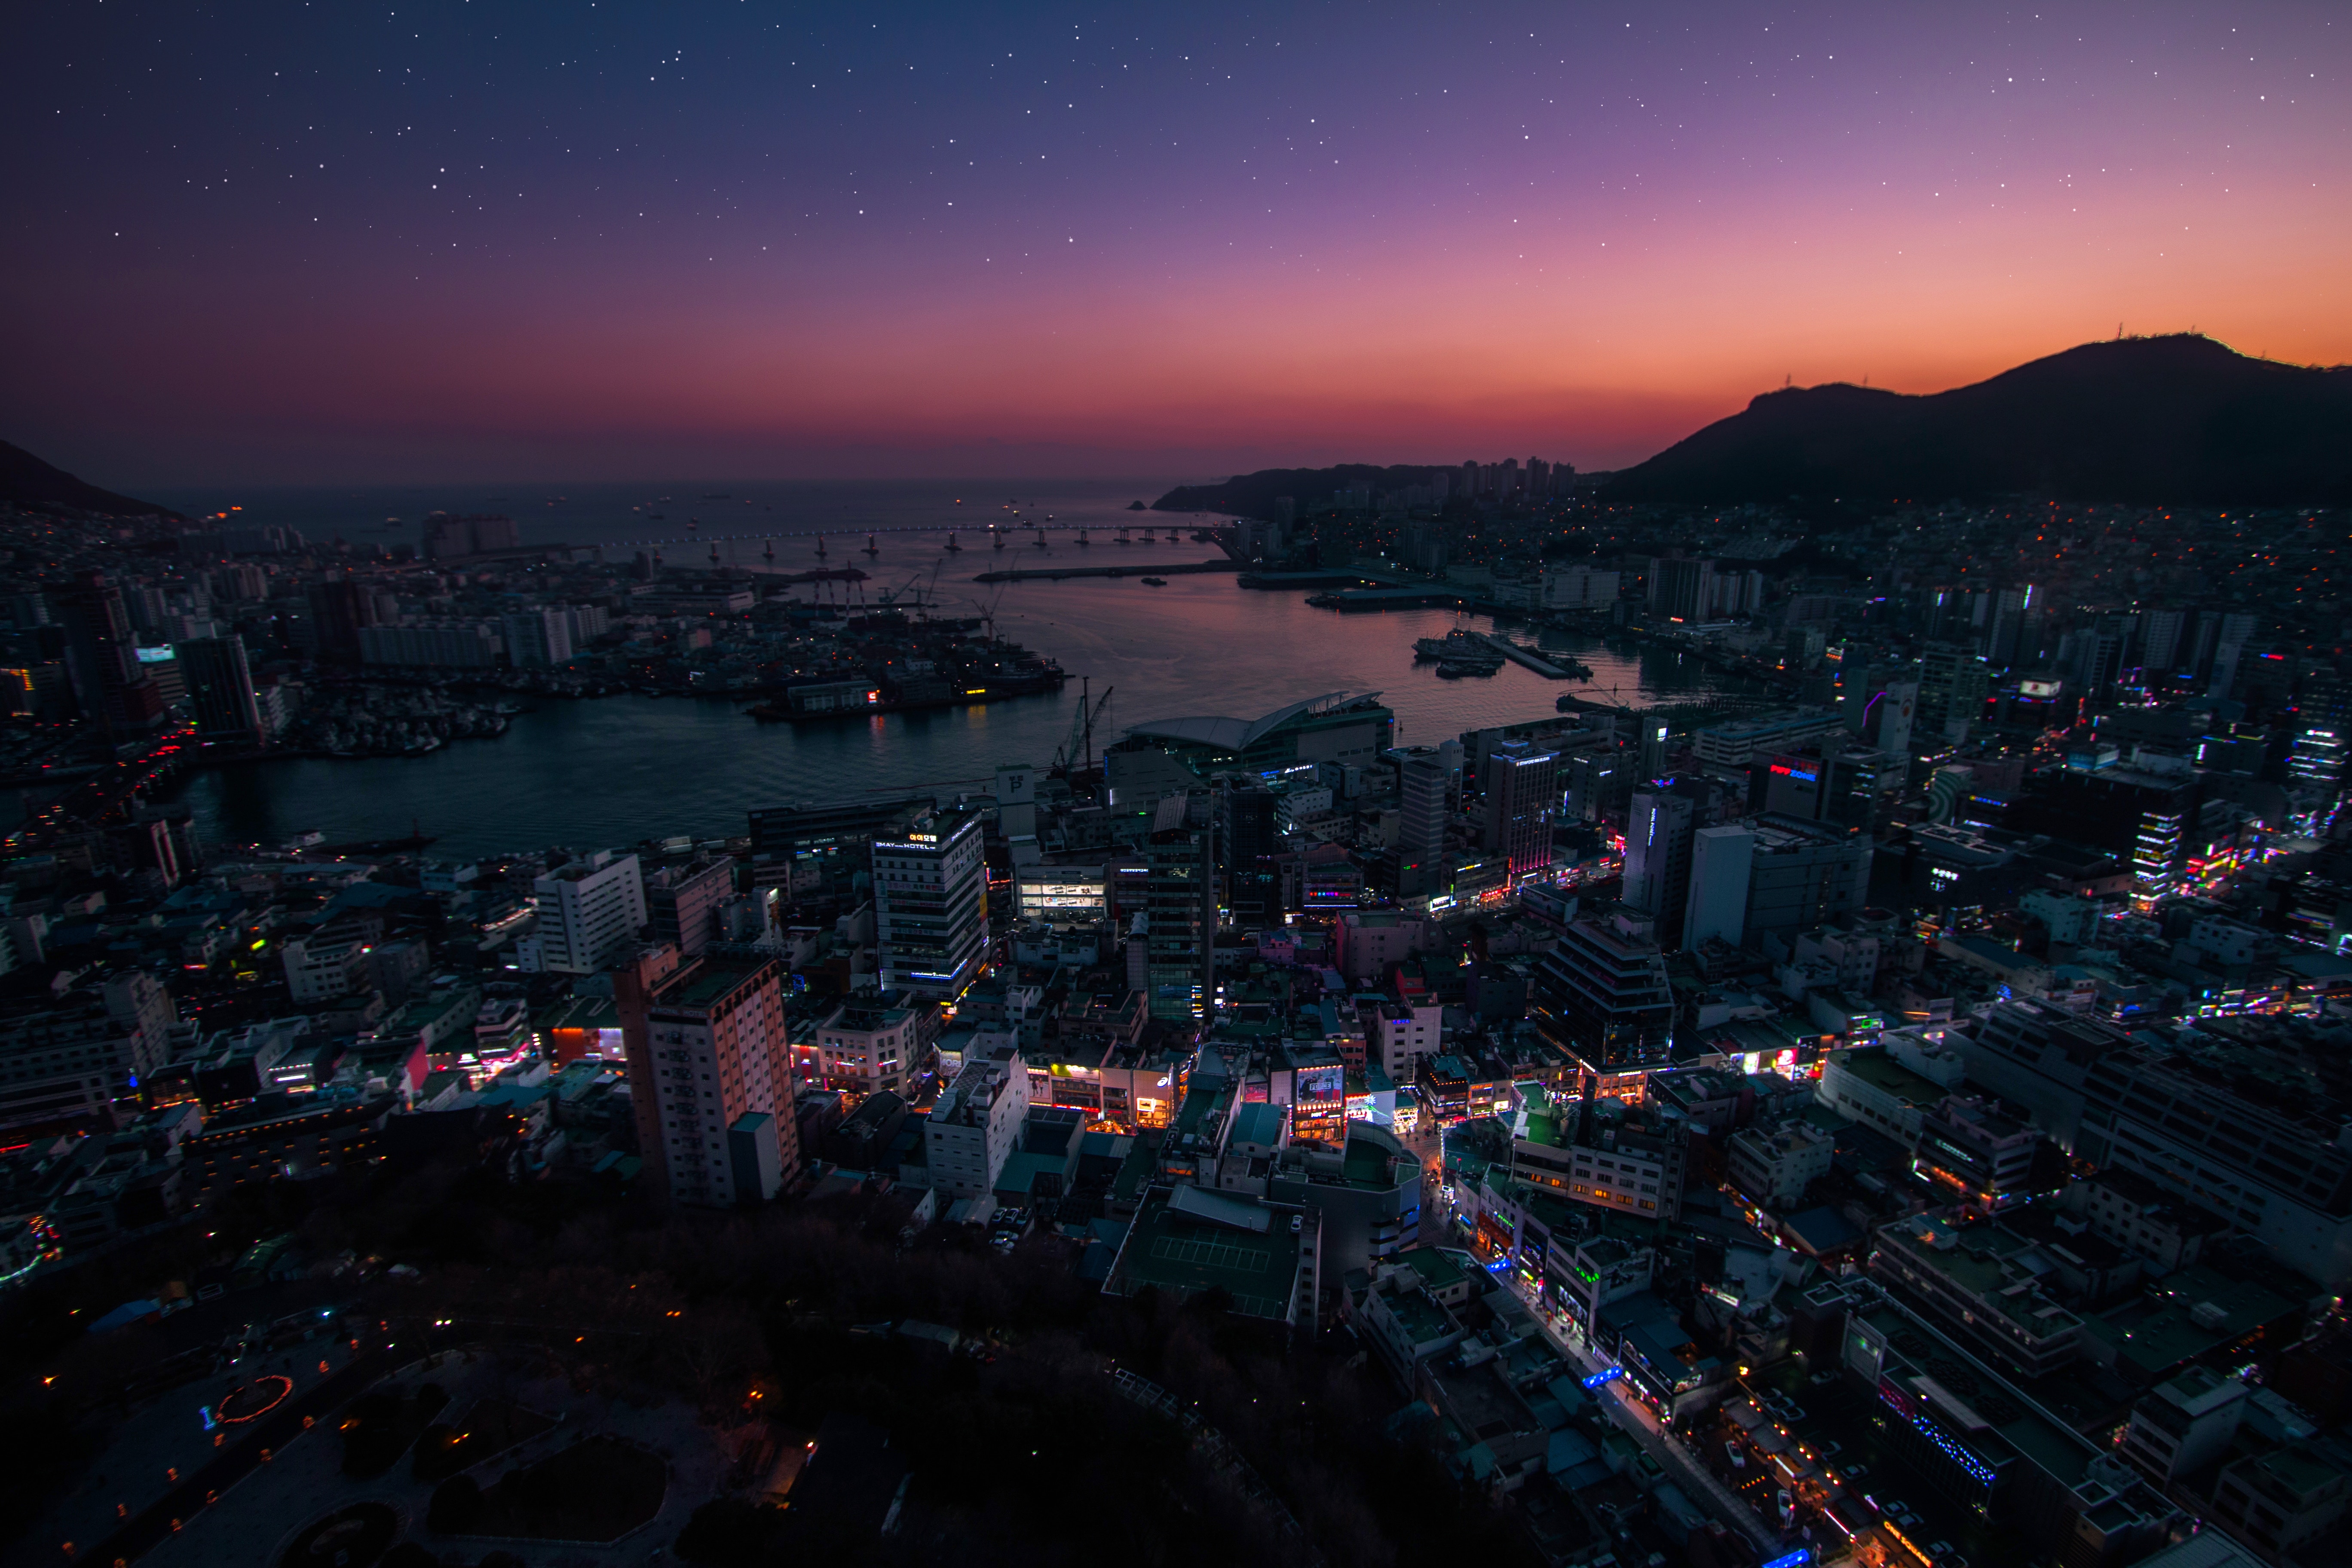 New Lock Screen Wallpapers south korea, view from above, cities, night city, city lights